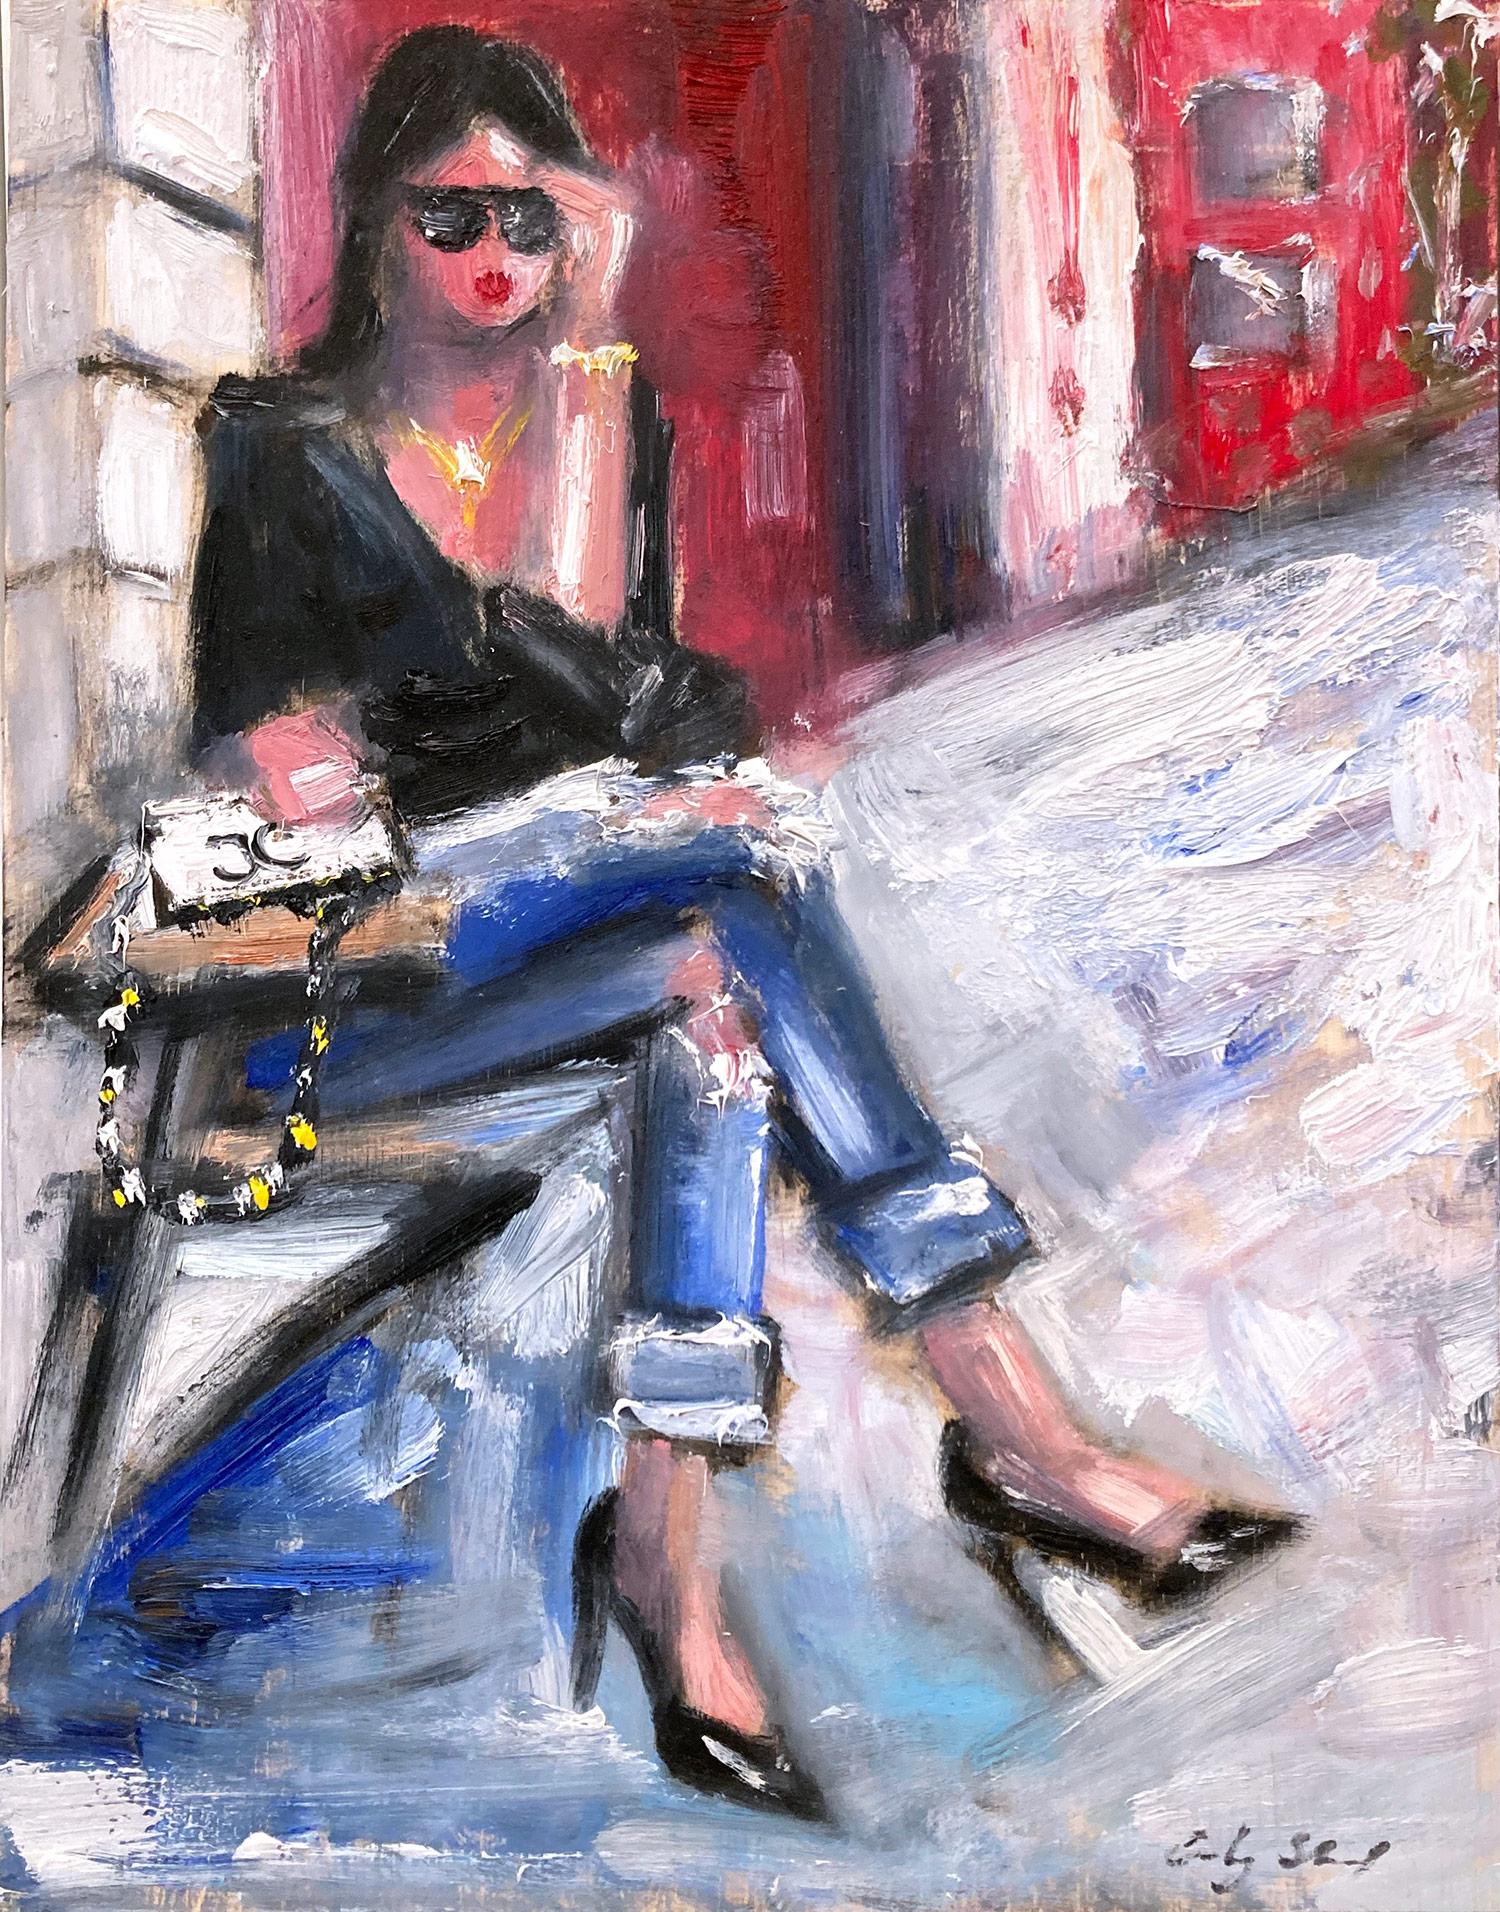 Cindy Shaoul Figurative Painting - "Morning Coffee in Soho n Chanel" Haute Couture Impressionistic Oil Painting NYC